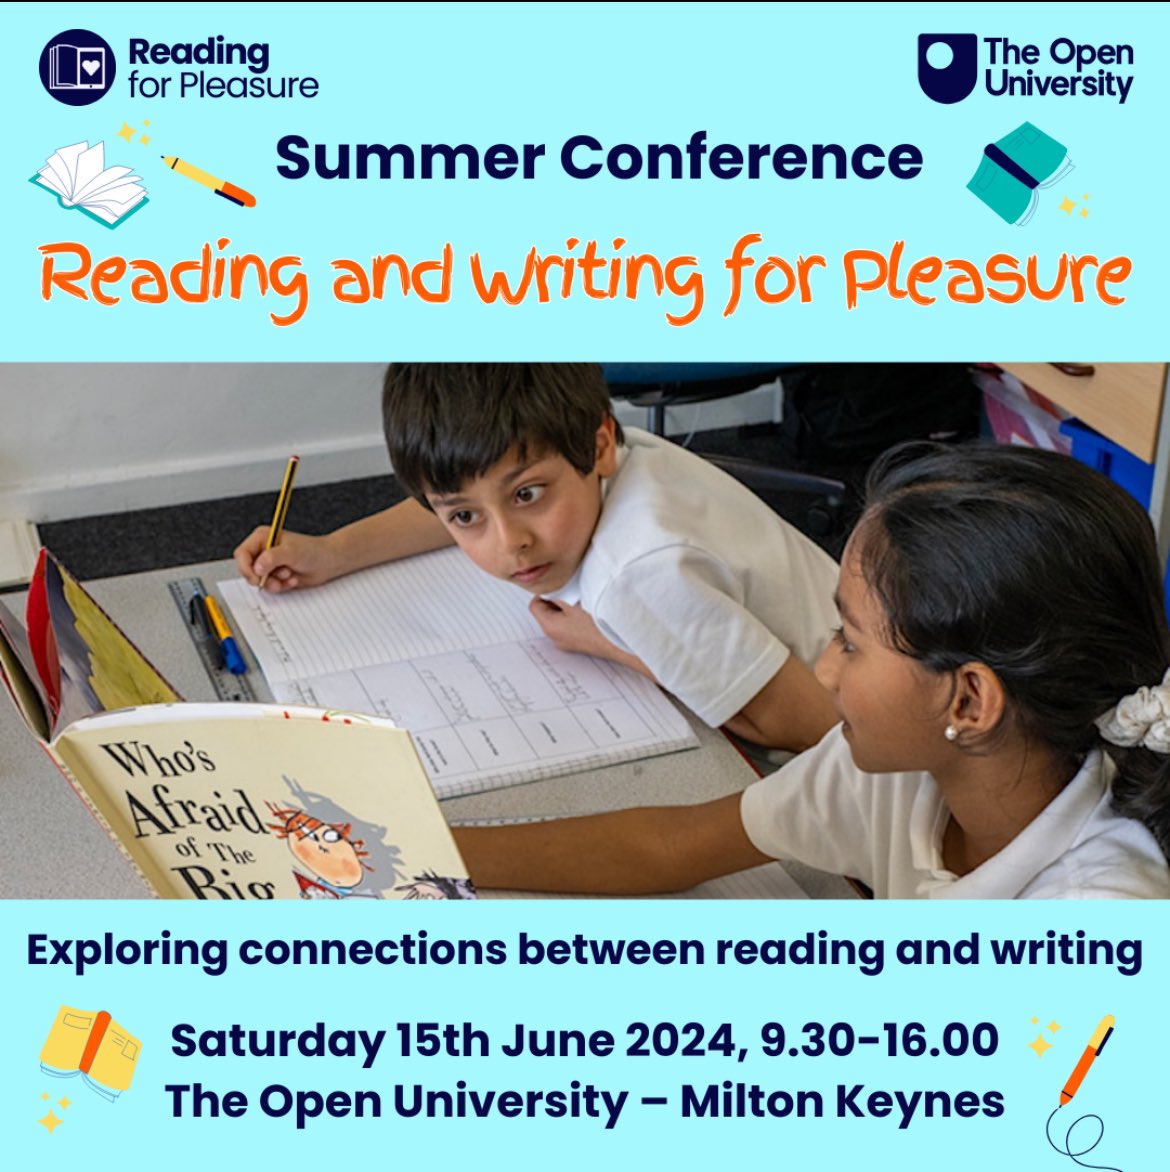 The next @OpenUni_RfP @The_UKLA conference takes place in June. A superb line-up, with author keynotes by @HGold_author & @EarlyTrain, plus workshops from @TeresaCremin, @sam_creighton, @miss_csquirrell, @MuchAdoALJ, @ImogenM16, @TobiasHayden & more. Info: ourfp.org/2024/04/18/rea…